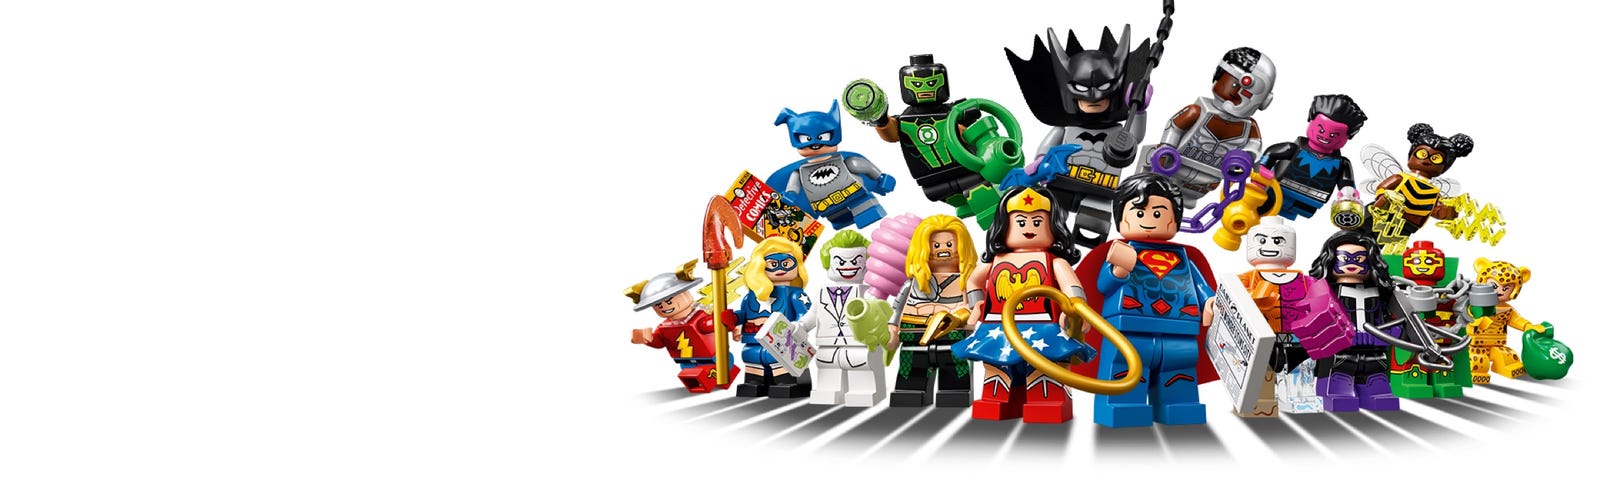 Super Heroes 71026 | DC | Buy online at the Official LEGO® Shop US